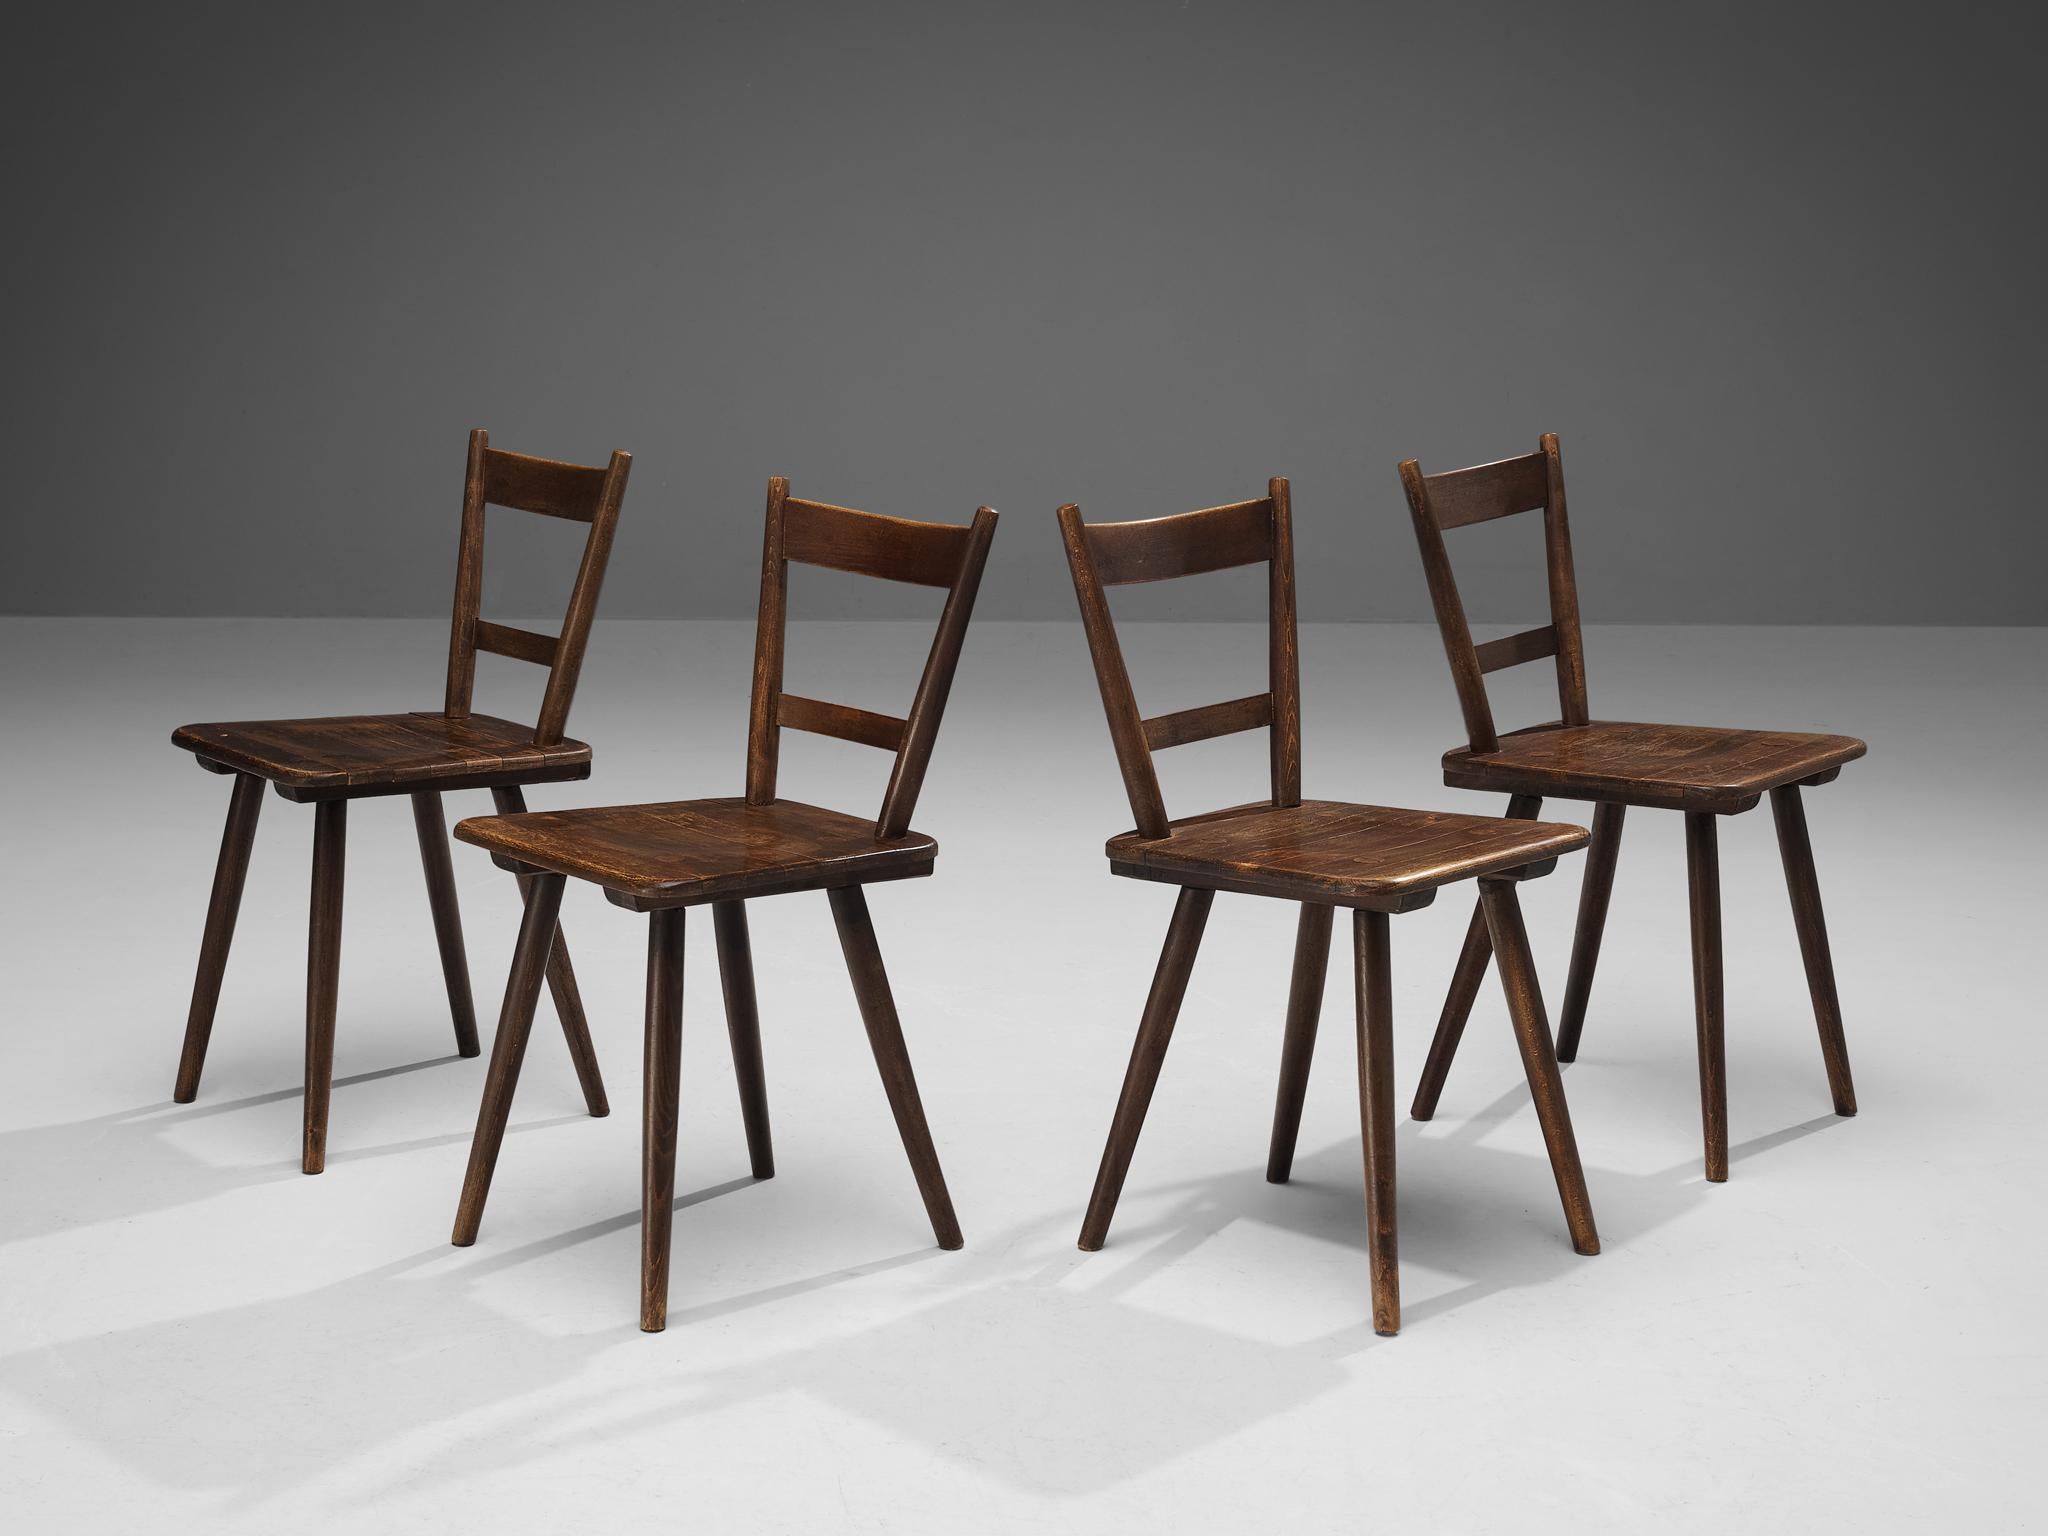 Set of four dining chairs, stained wood, France, late 1940s. 

Set of four rustic dining chairs manufactured in France. Simple yet stylish, this chair features a modest frame with sleek, elegant elements. Note for example the tapered legs slightly